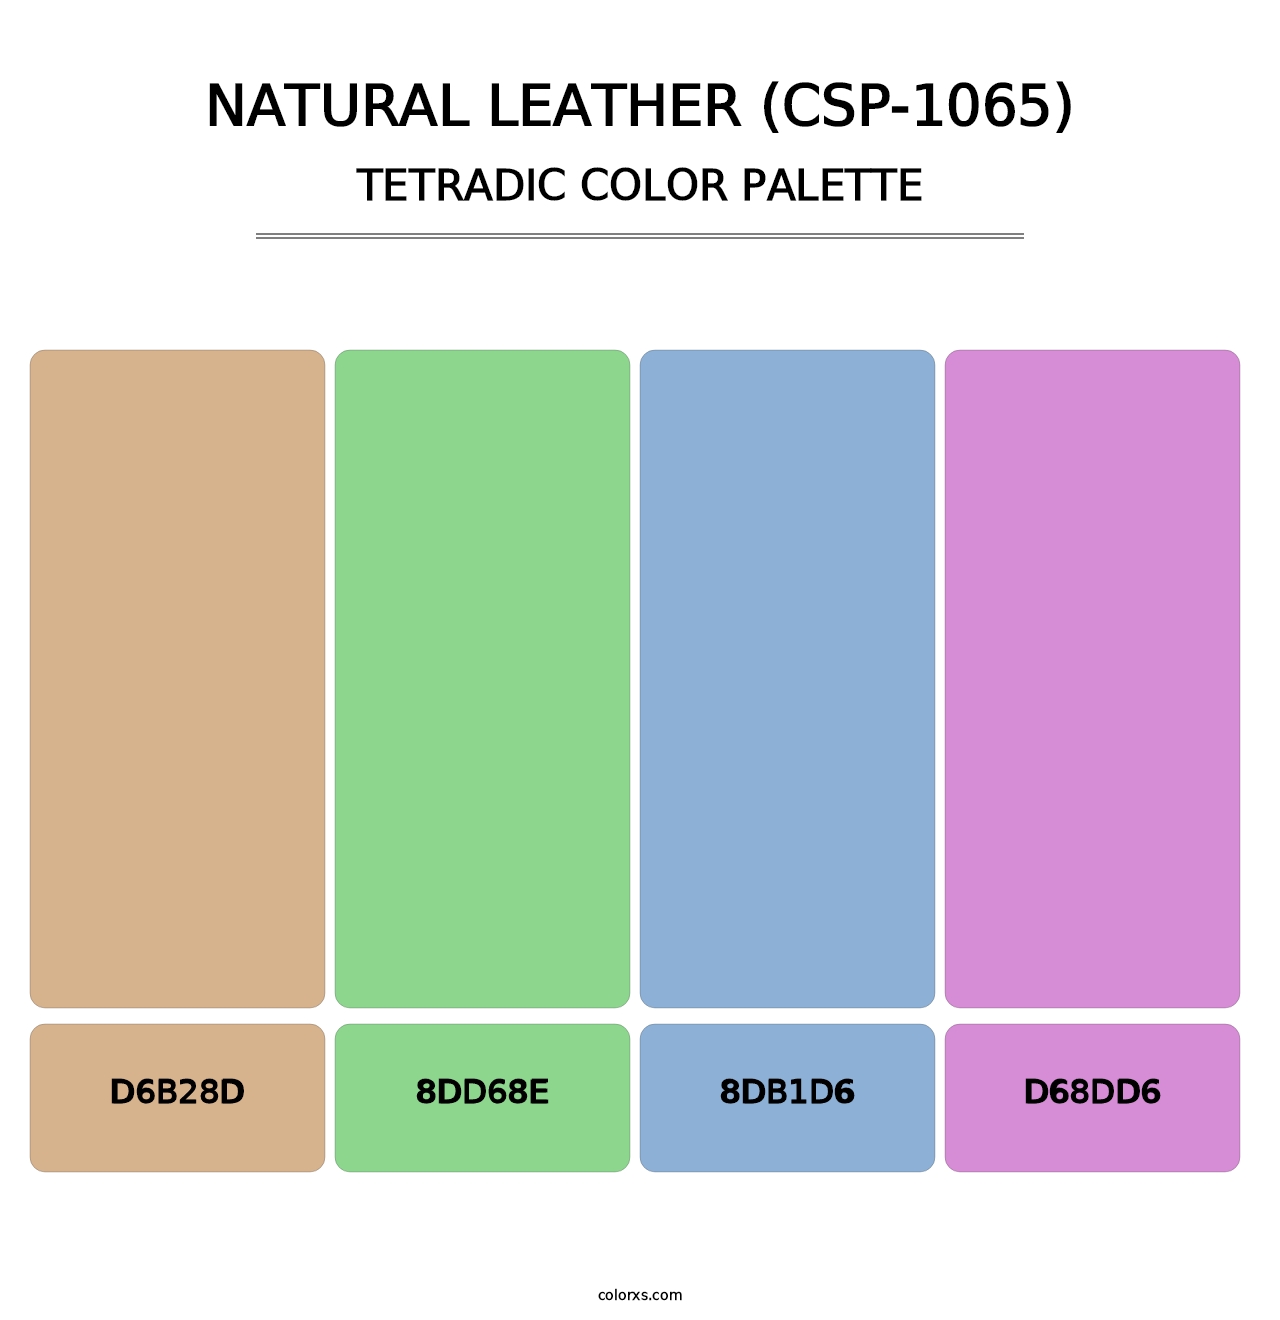 Natural Leather (CSP-1065) - Tetradic Color Palette